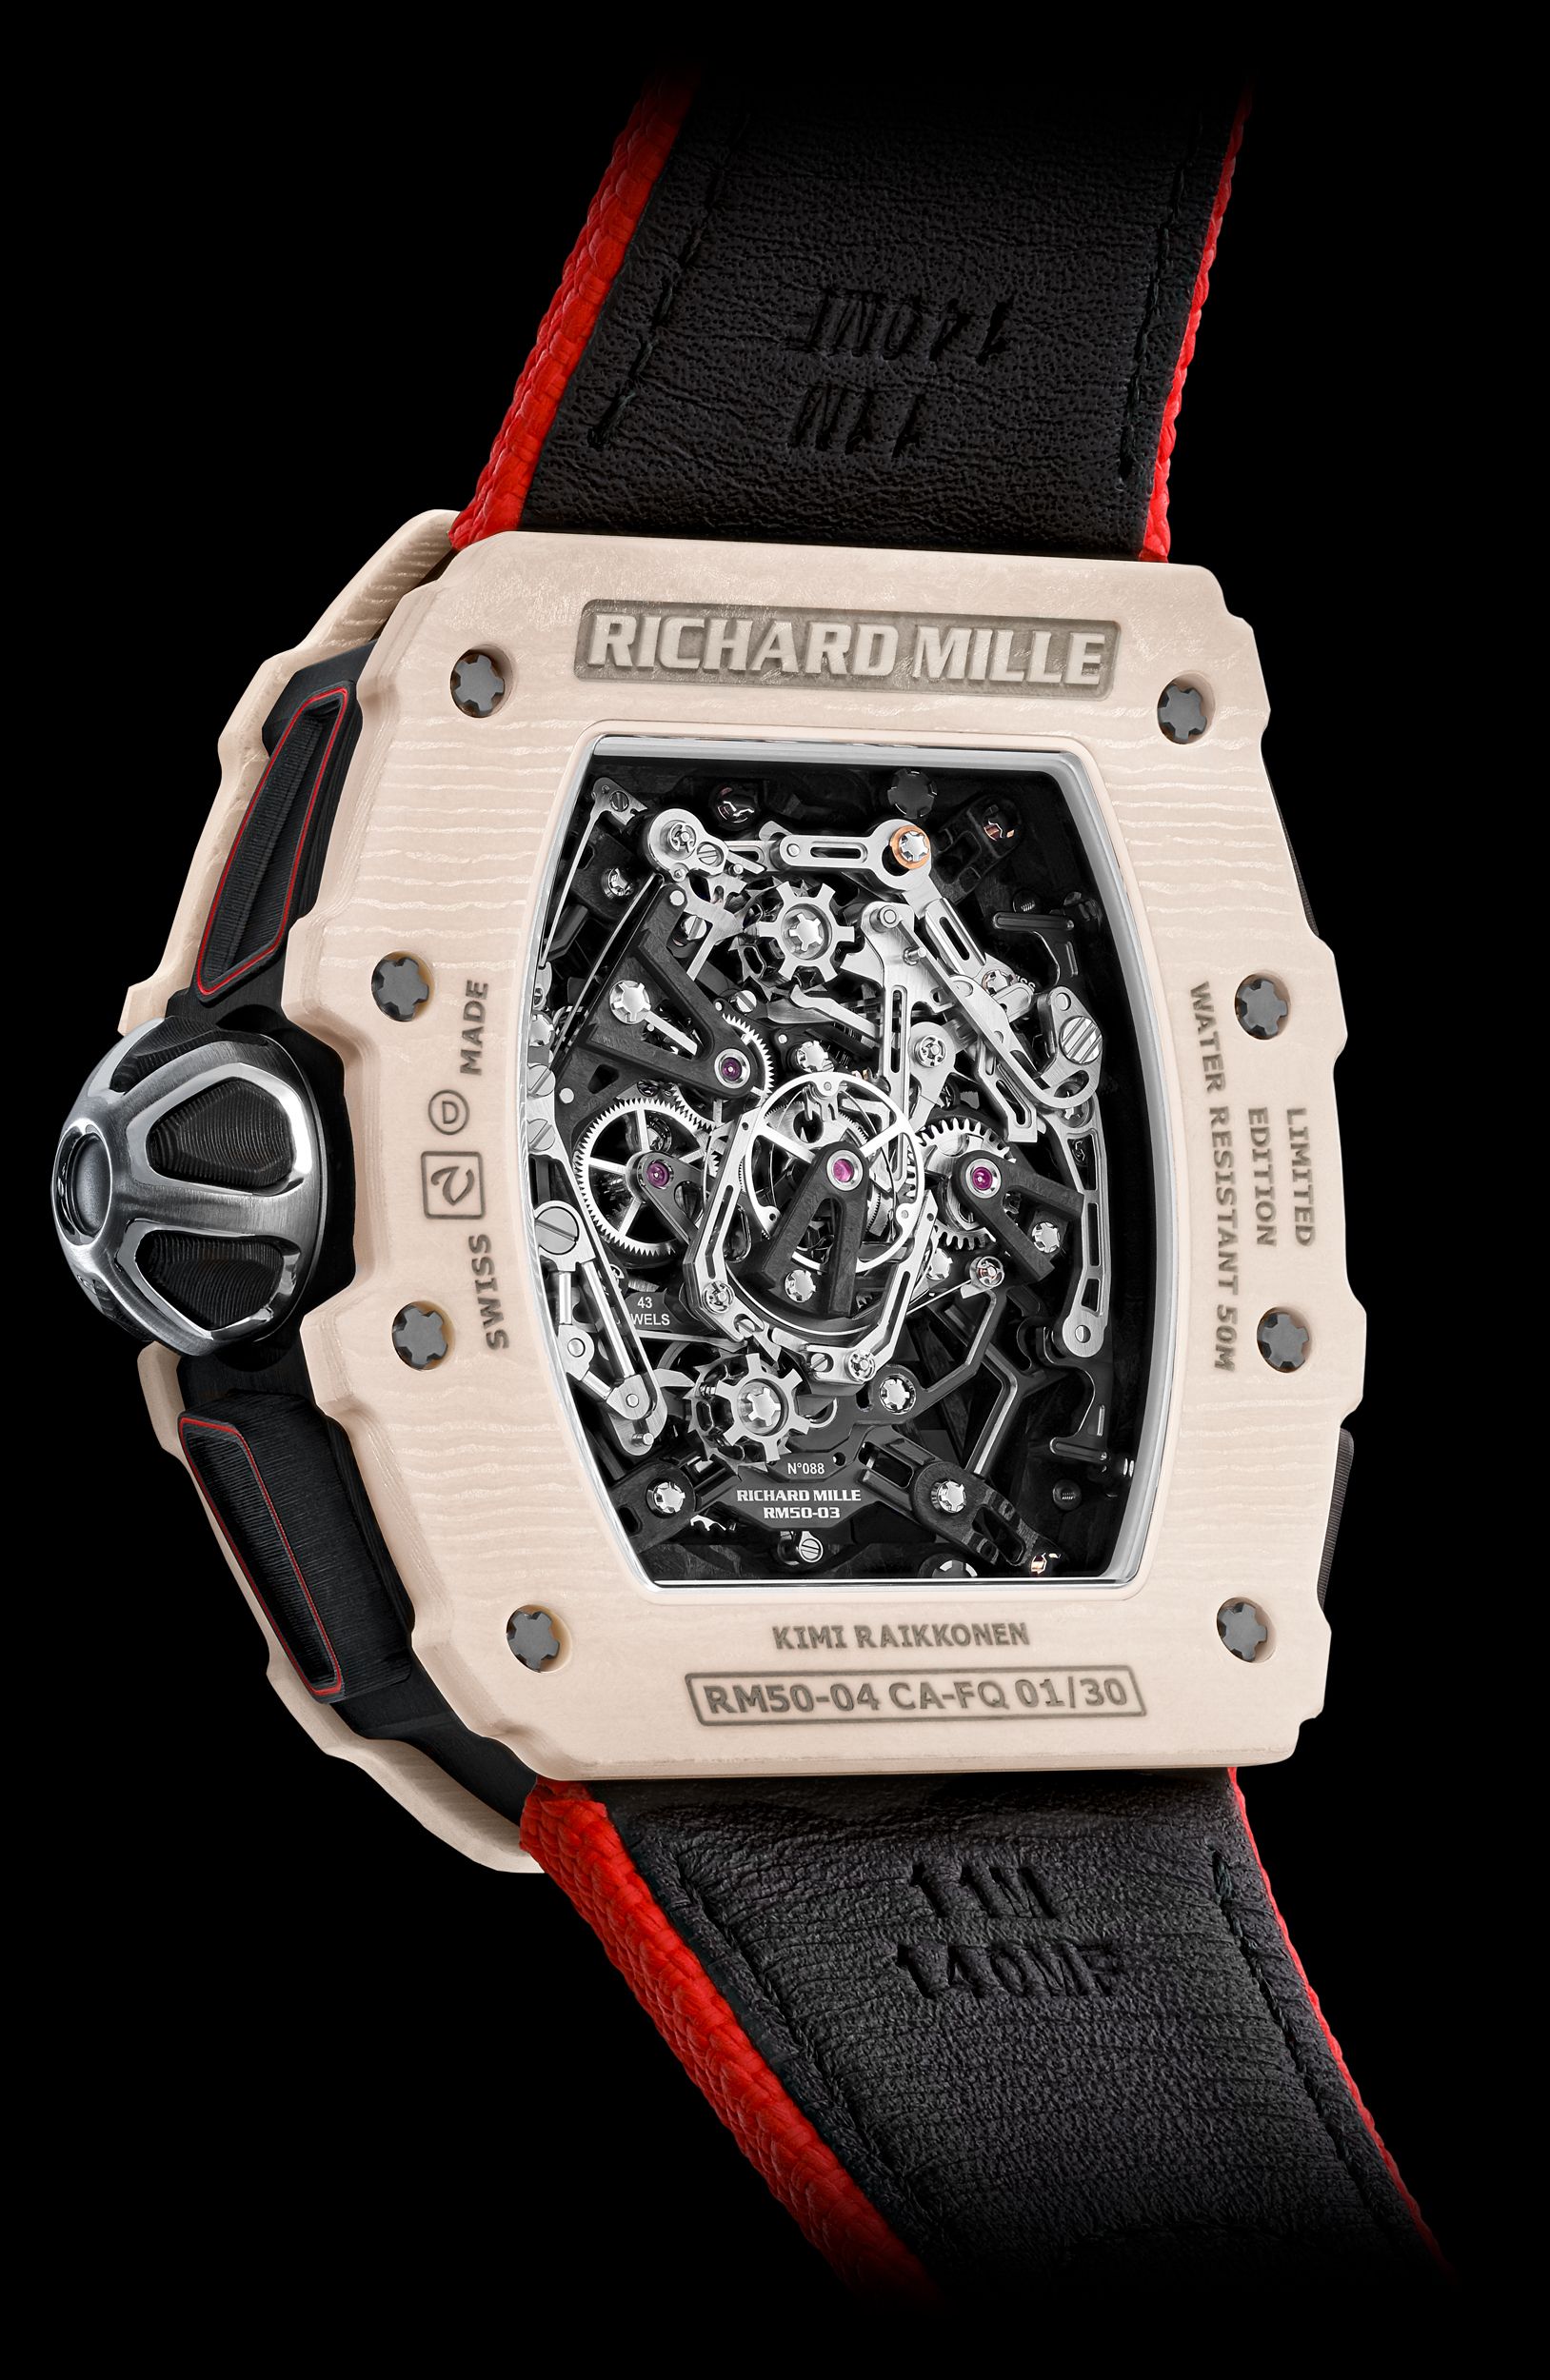 Richard Mille Perini Navi Cup RM 014 TourbillonRichard Mille Pre-Owned RM 032 Flyback Chronograph Diver